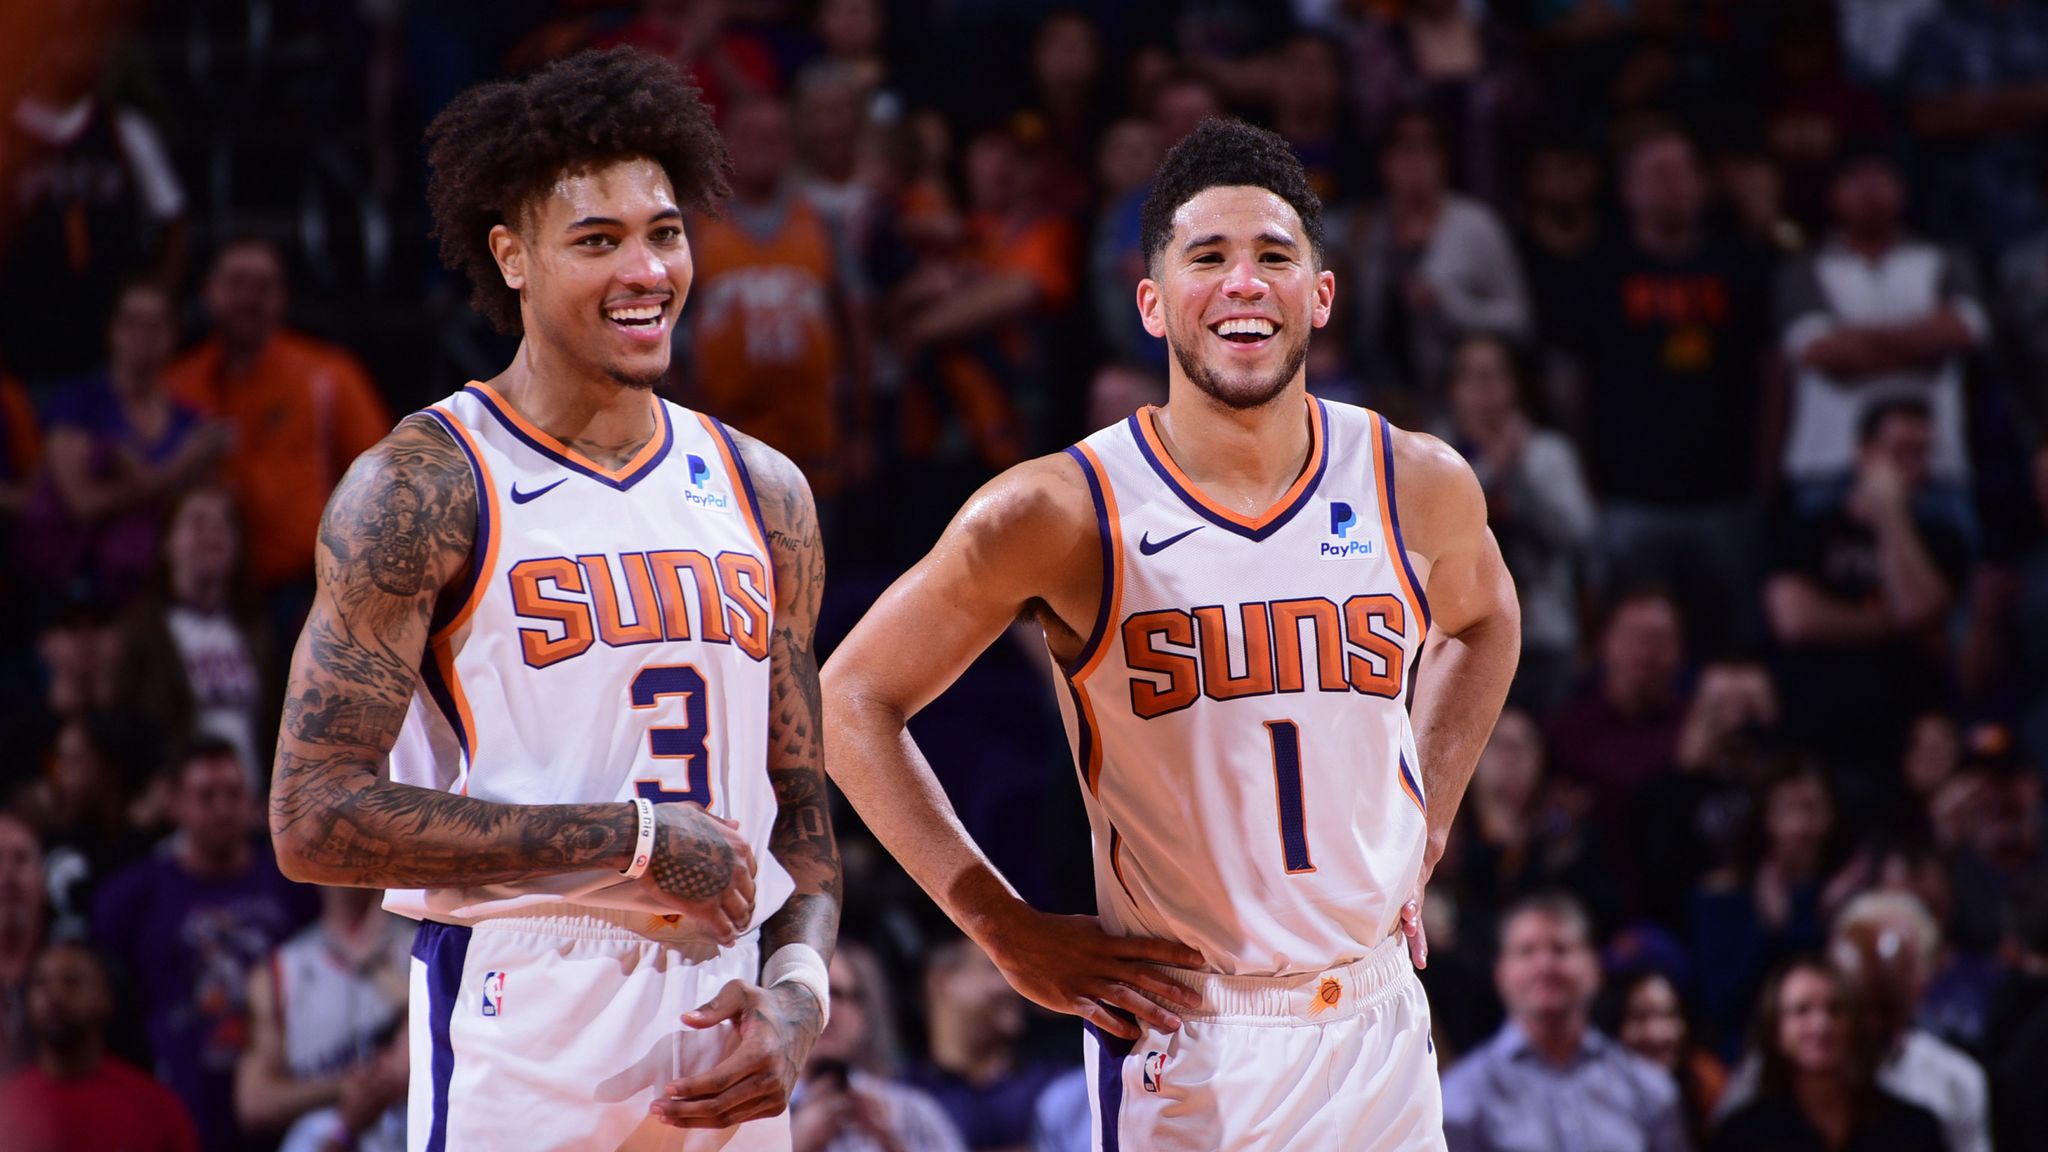 Report: Kelly Oubre Jr. returns to Suns on two-year deal